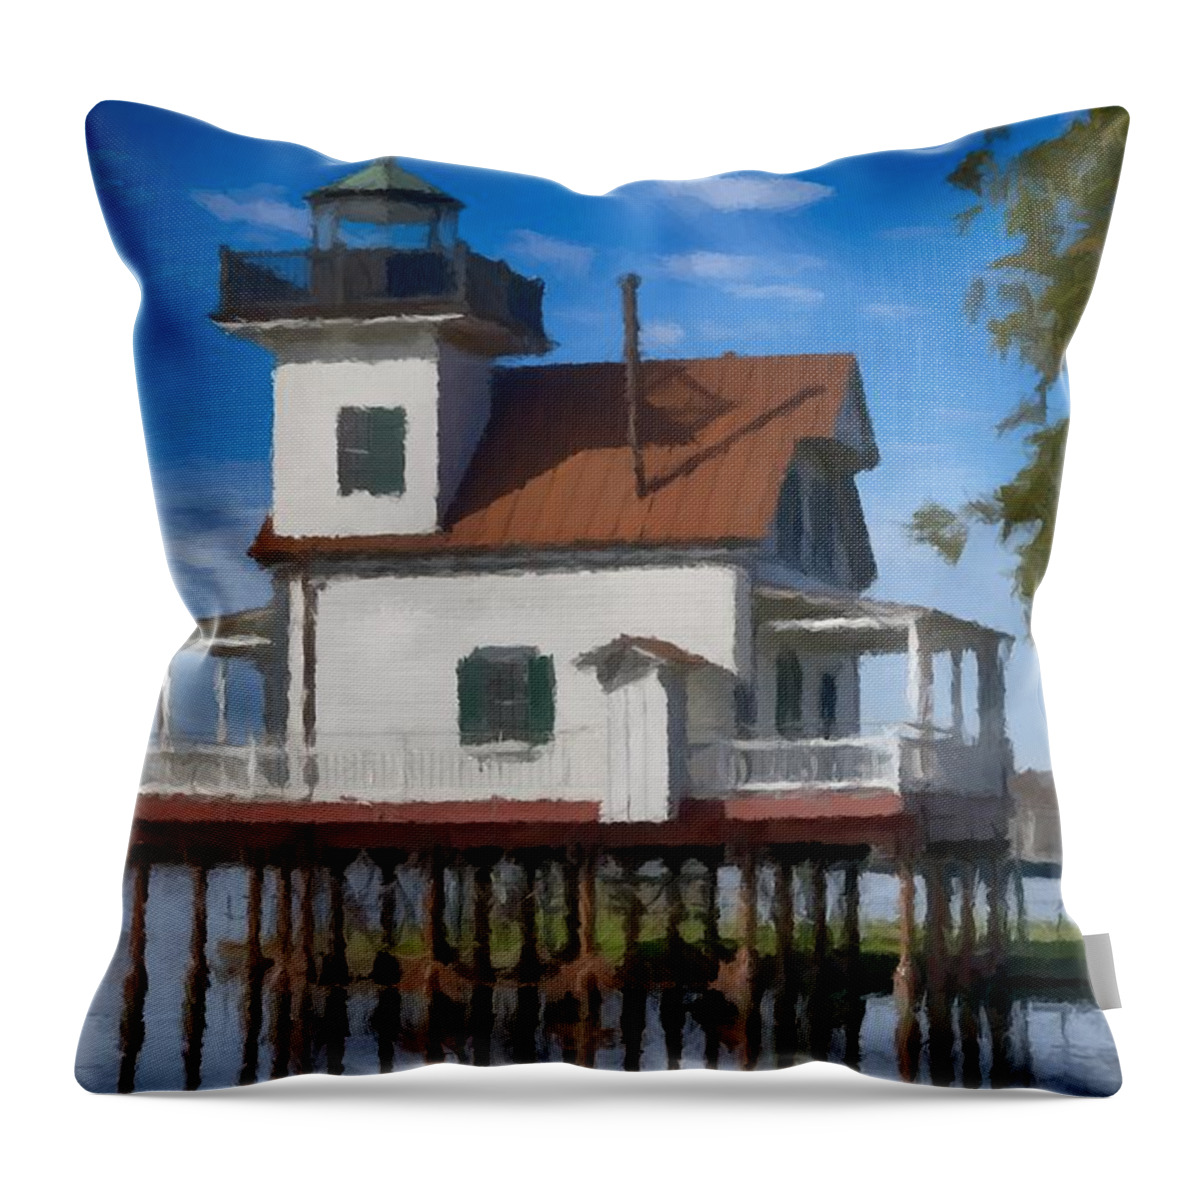 Lighthouse Throw Pillow featuring the photograph Roanoke River Lighthouse North Carolina by David Dehner